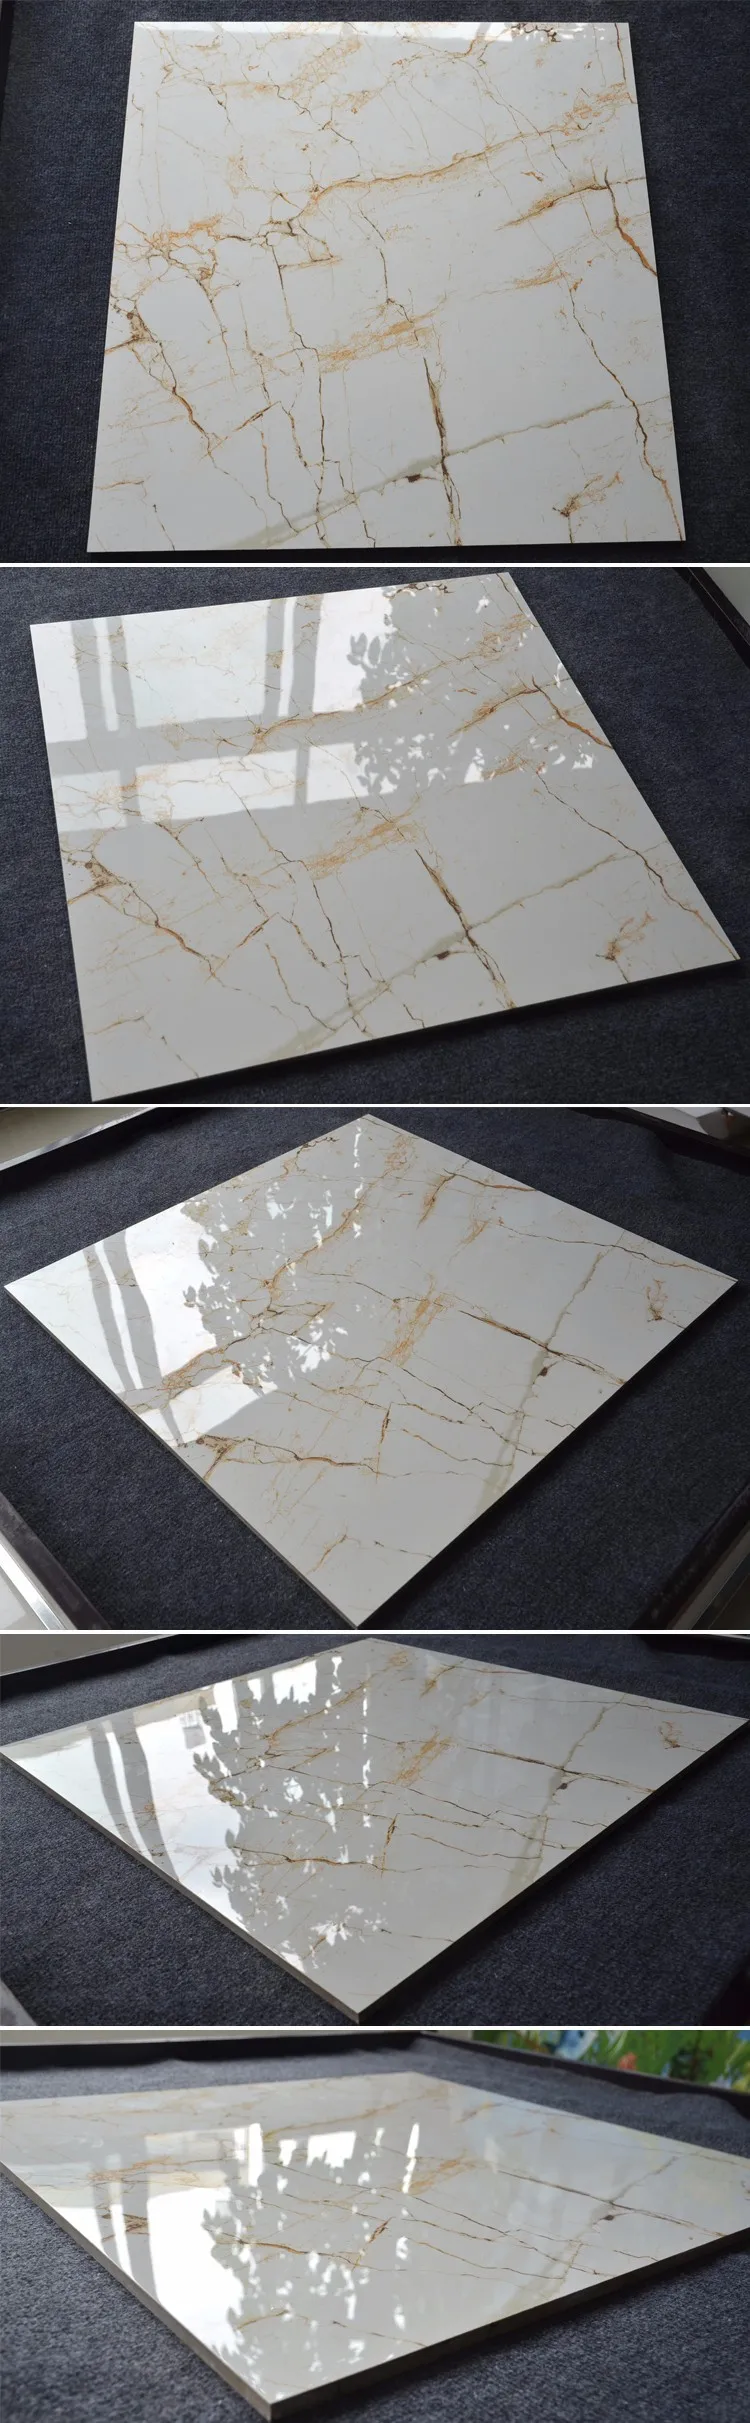 24 Africa Lenasia Bay Galaxy Printed Gold Vein White Marble Tile - Buy